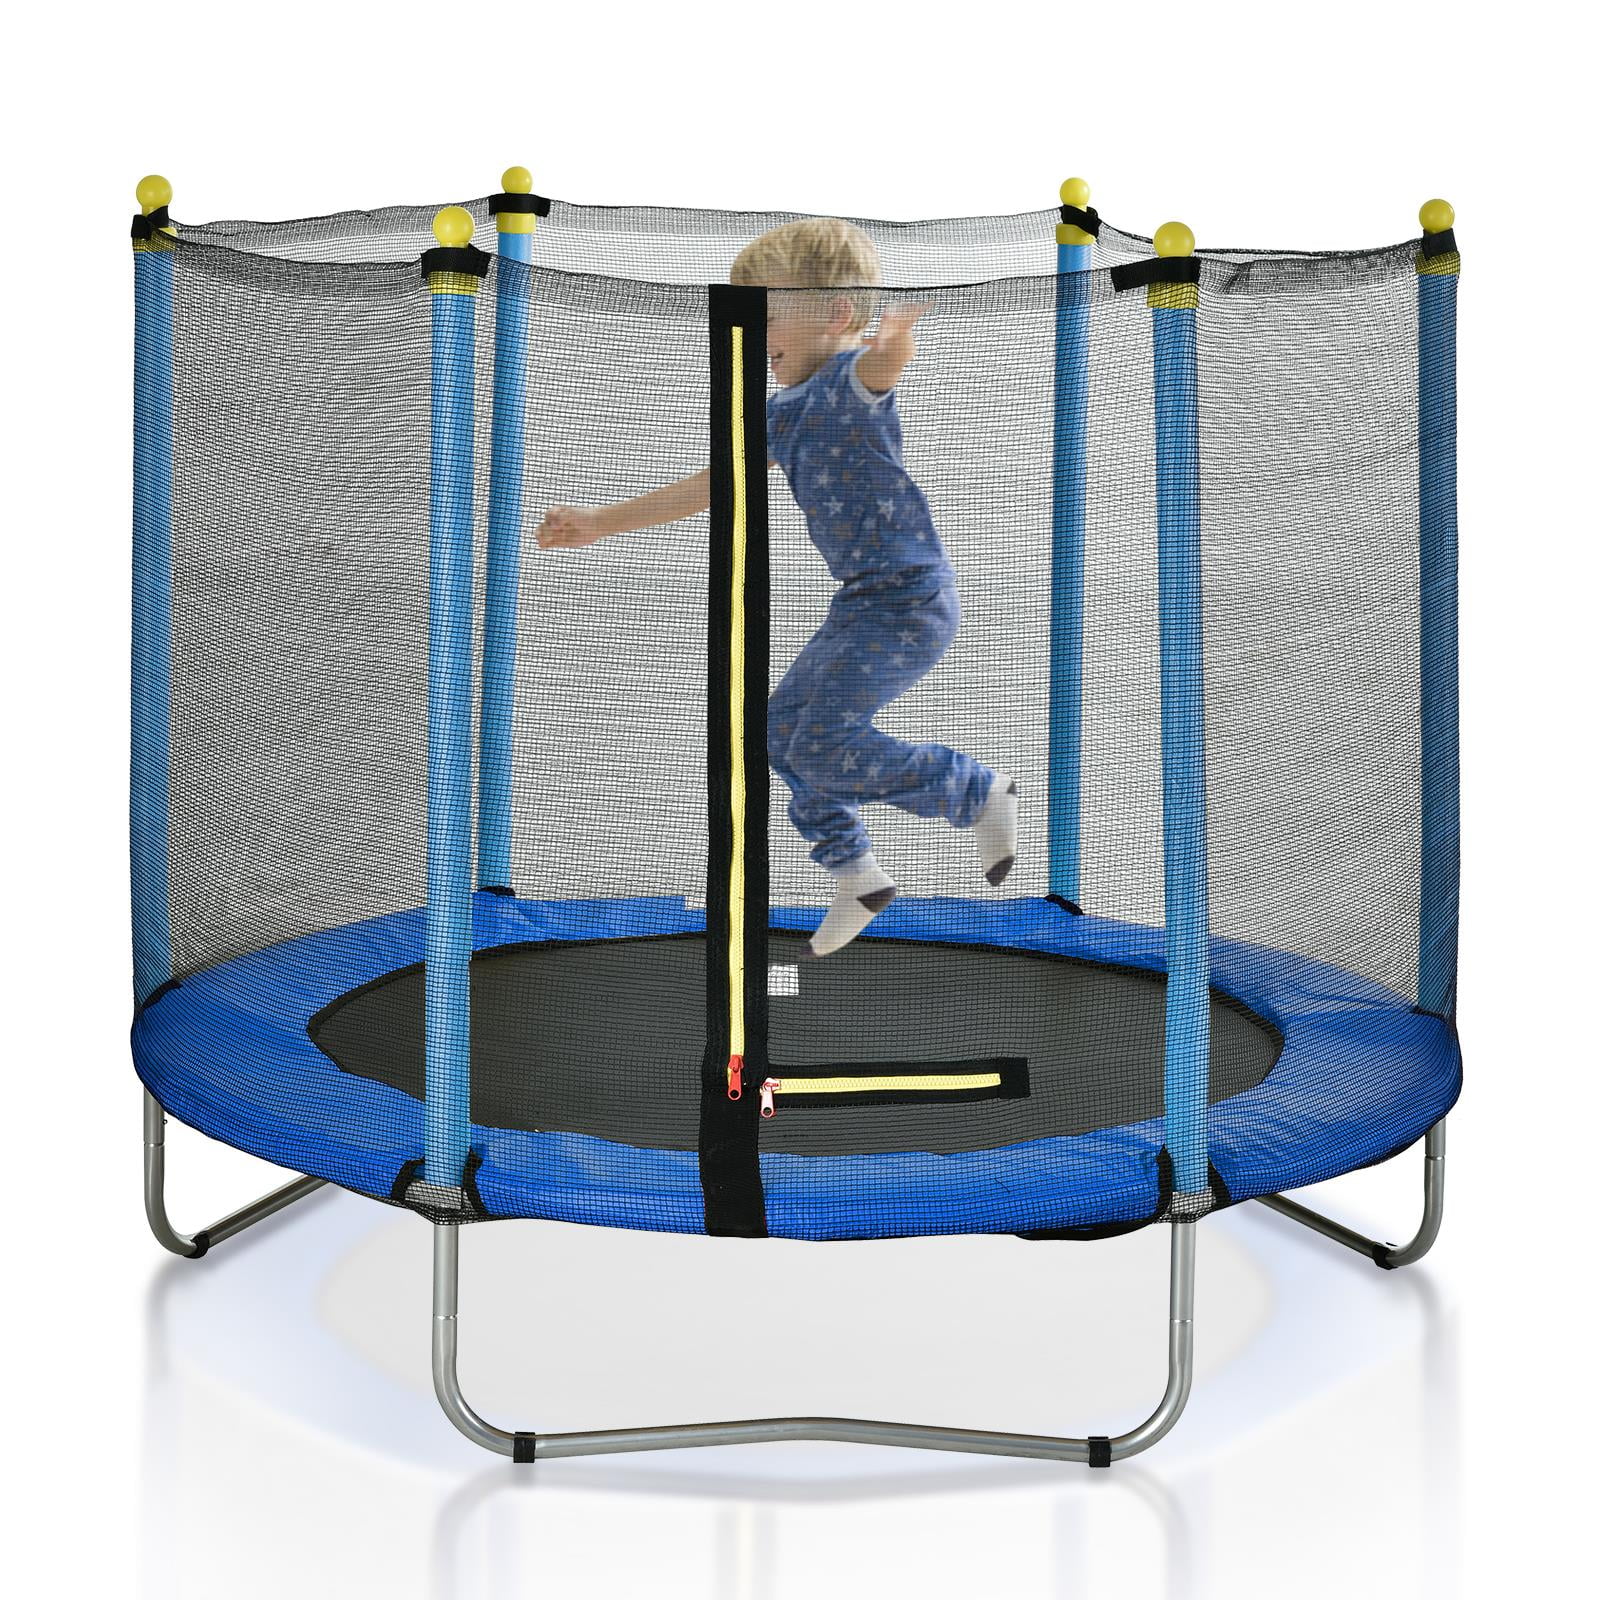 Zimtown My First Small 60 inches Kids Mini Round Trampoline Combo, with Surround Enclosure, Blue